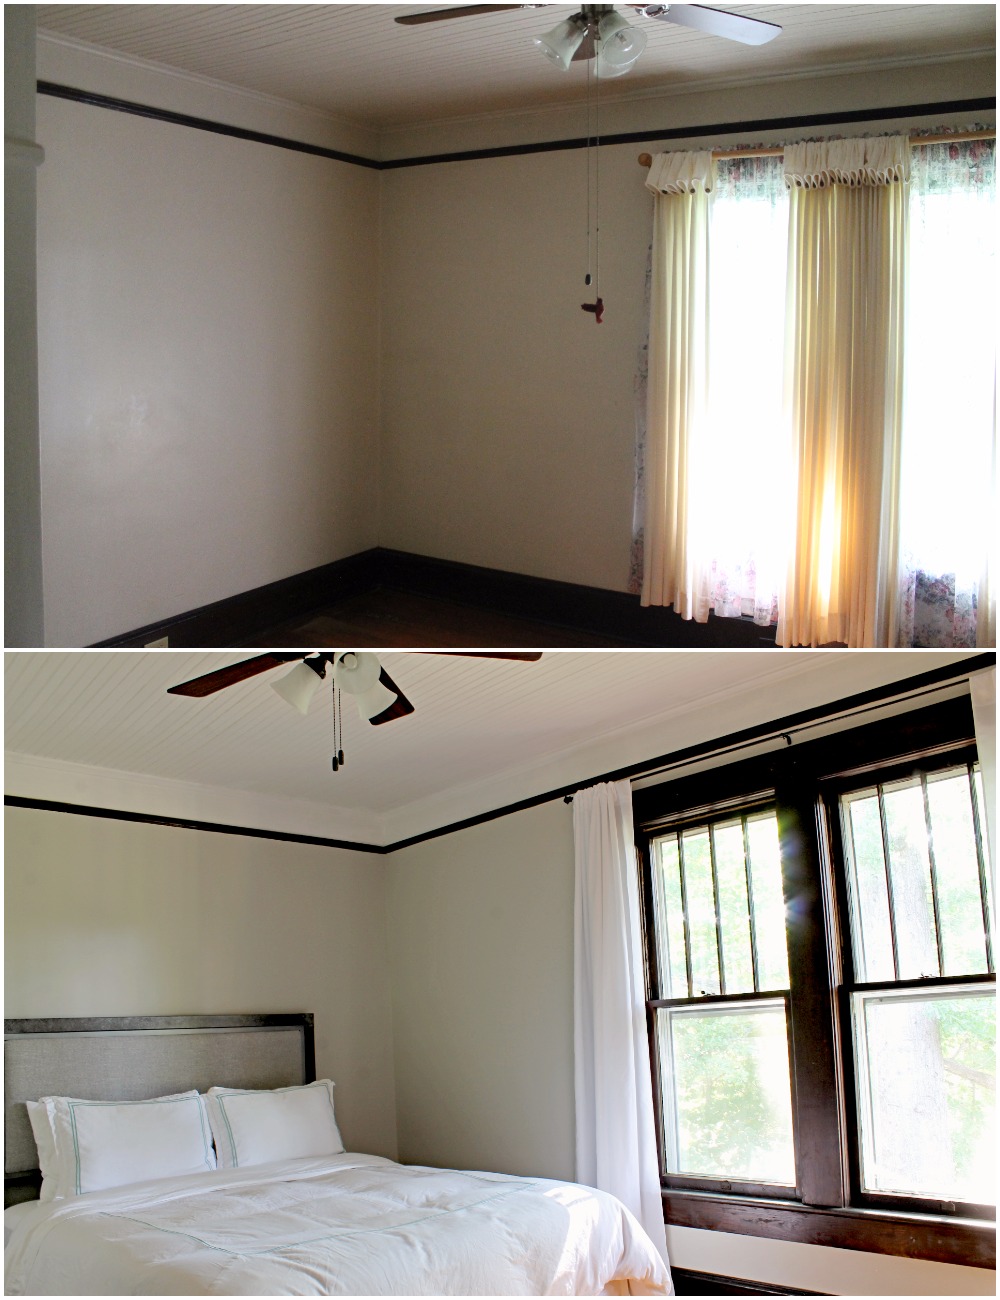 House Flipping Before and Afters - DIY BUDGET BEDROOM IDEAS (1).jpg